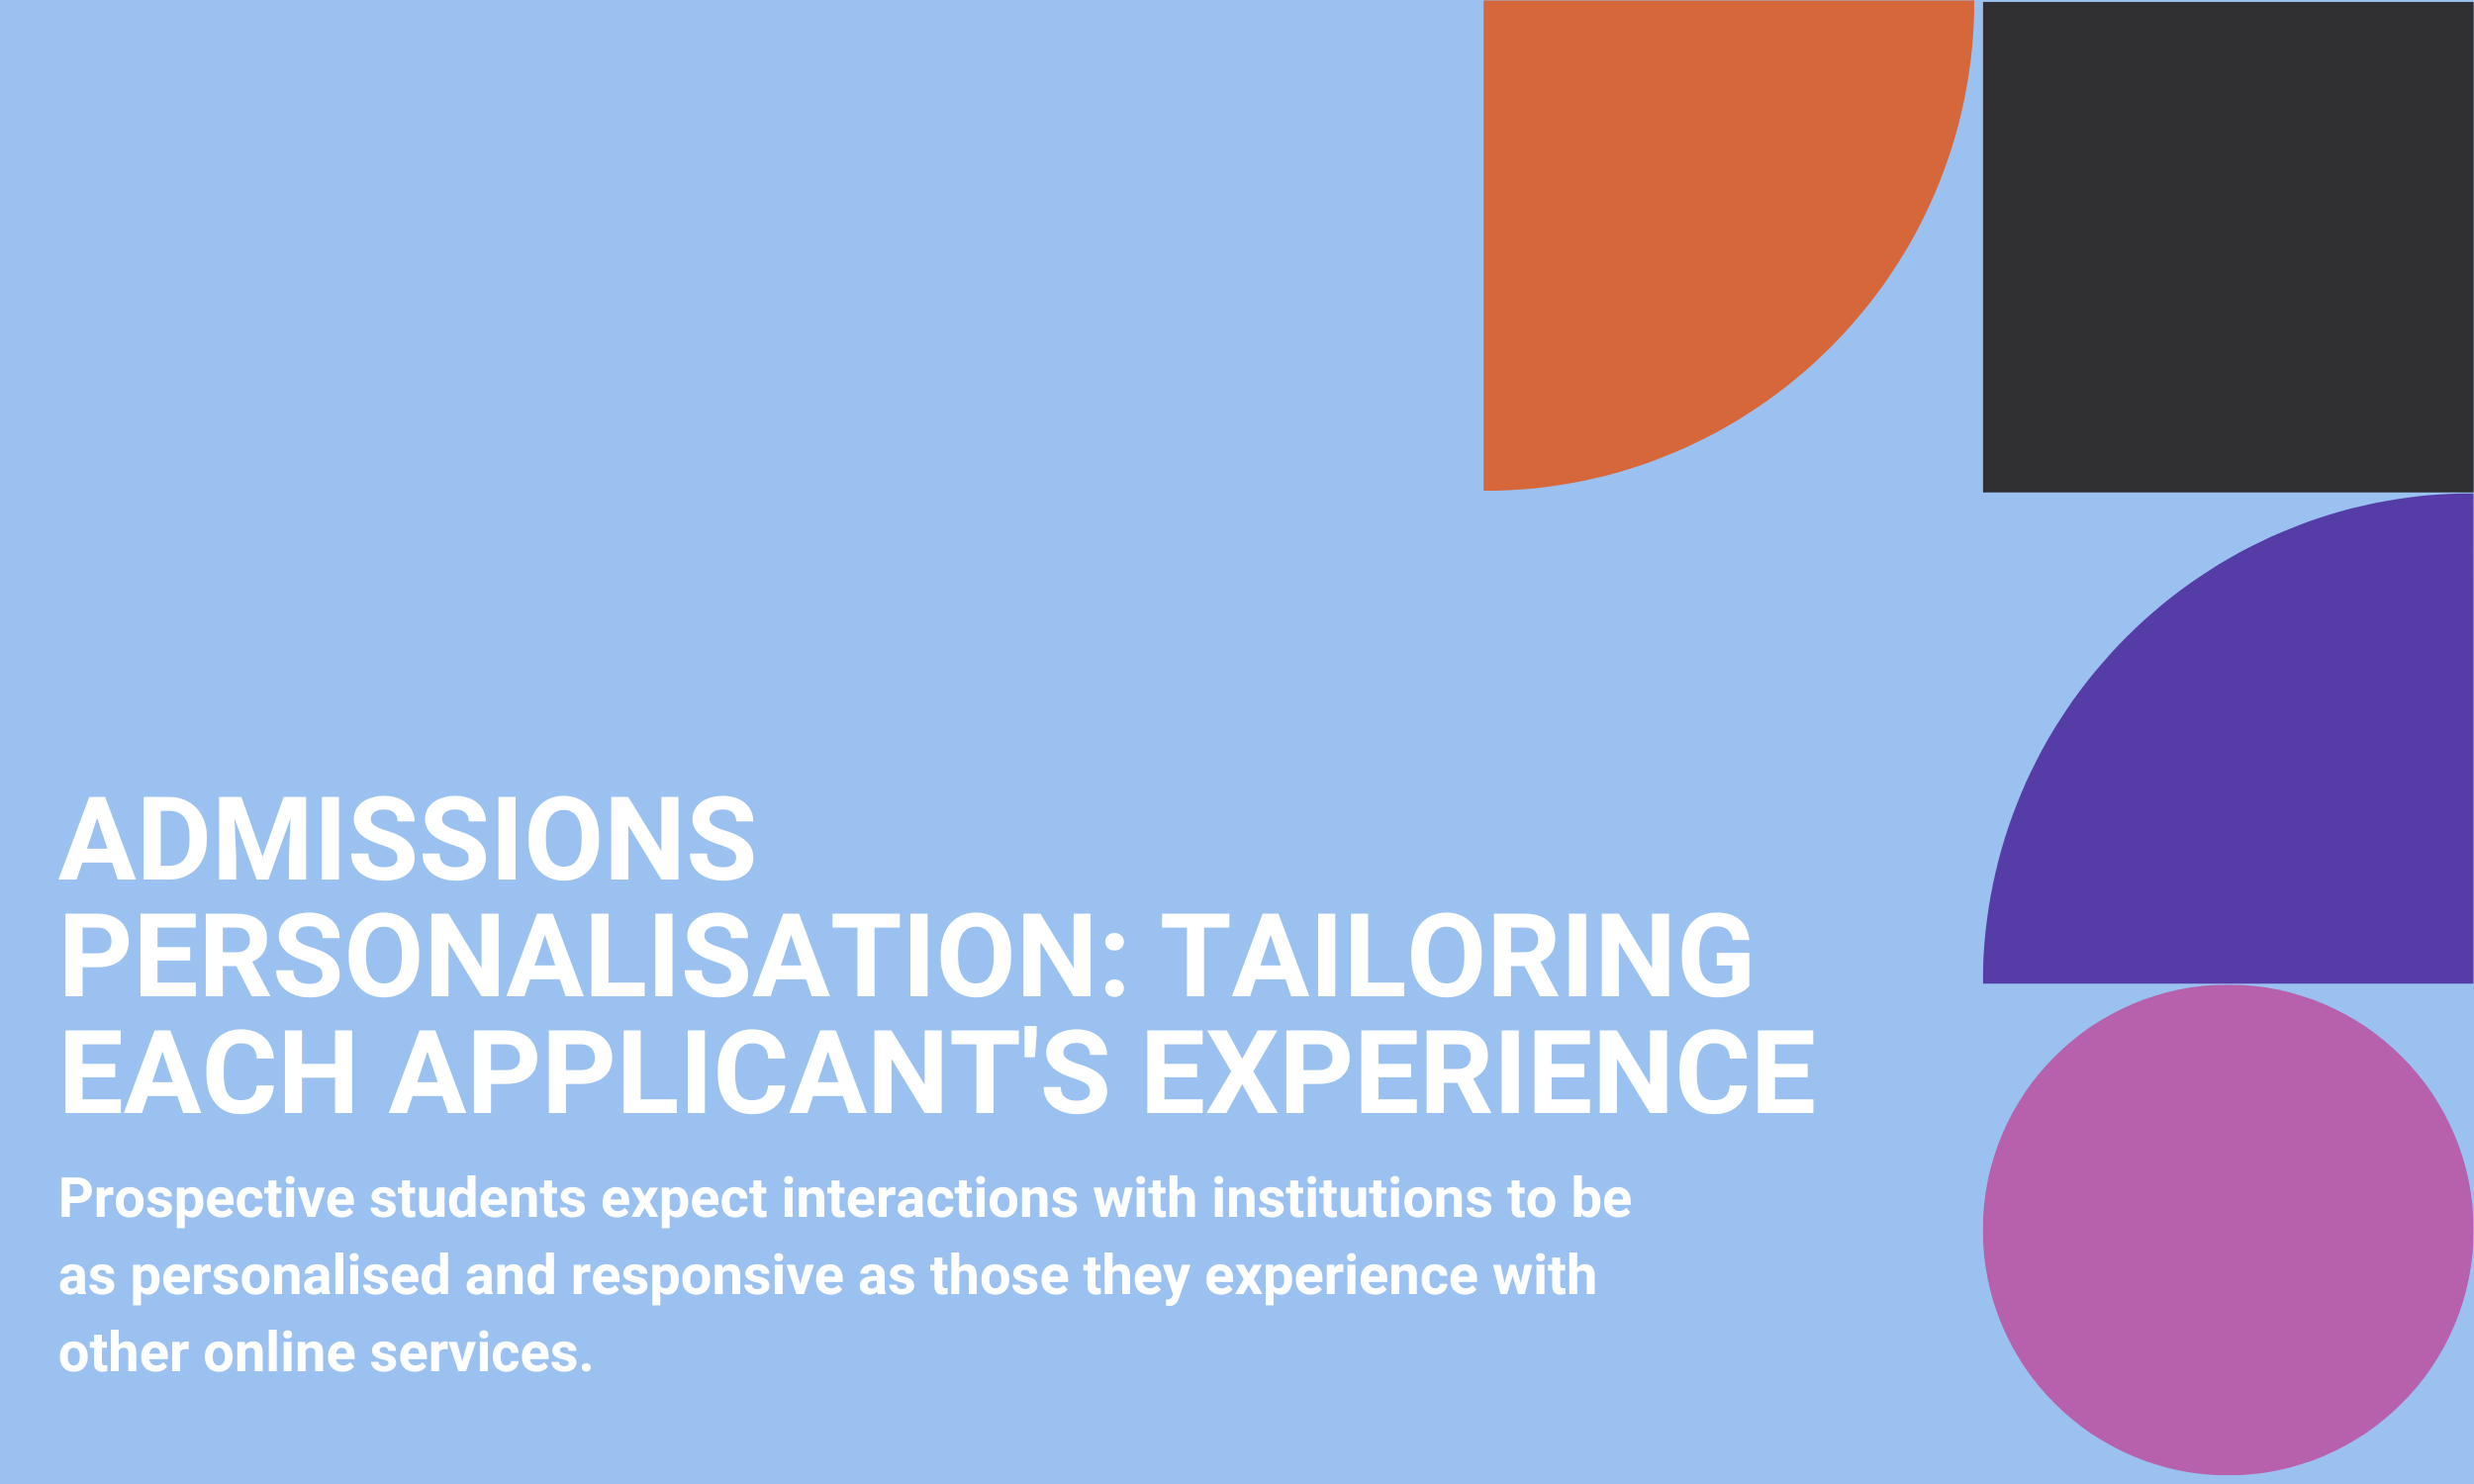 Admissions personalisation: tailoring each applicant's experience